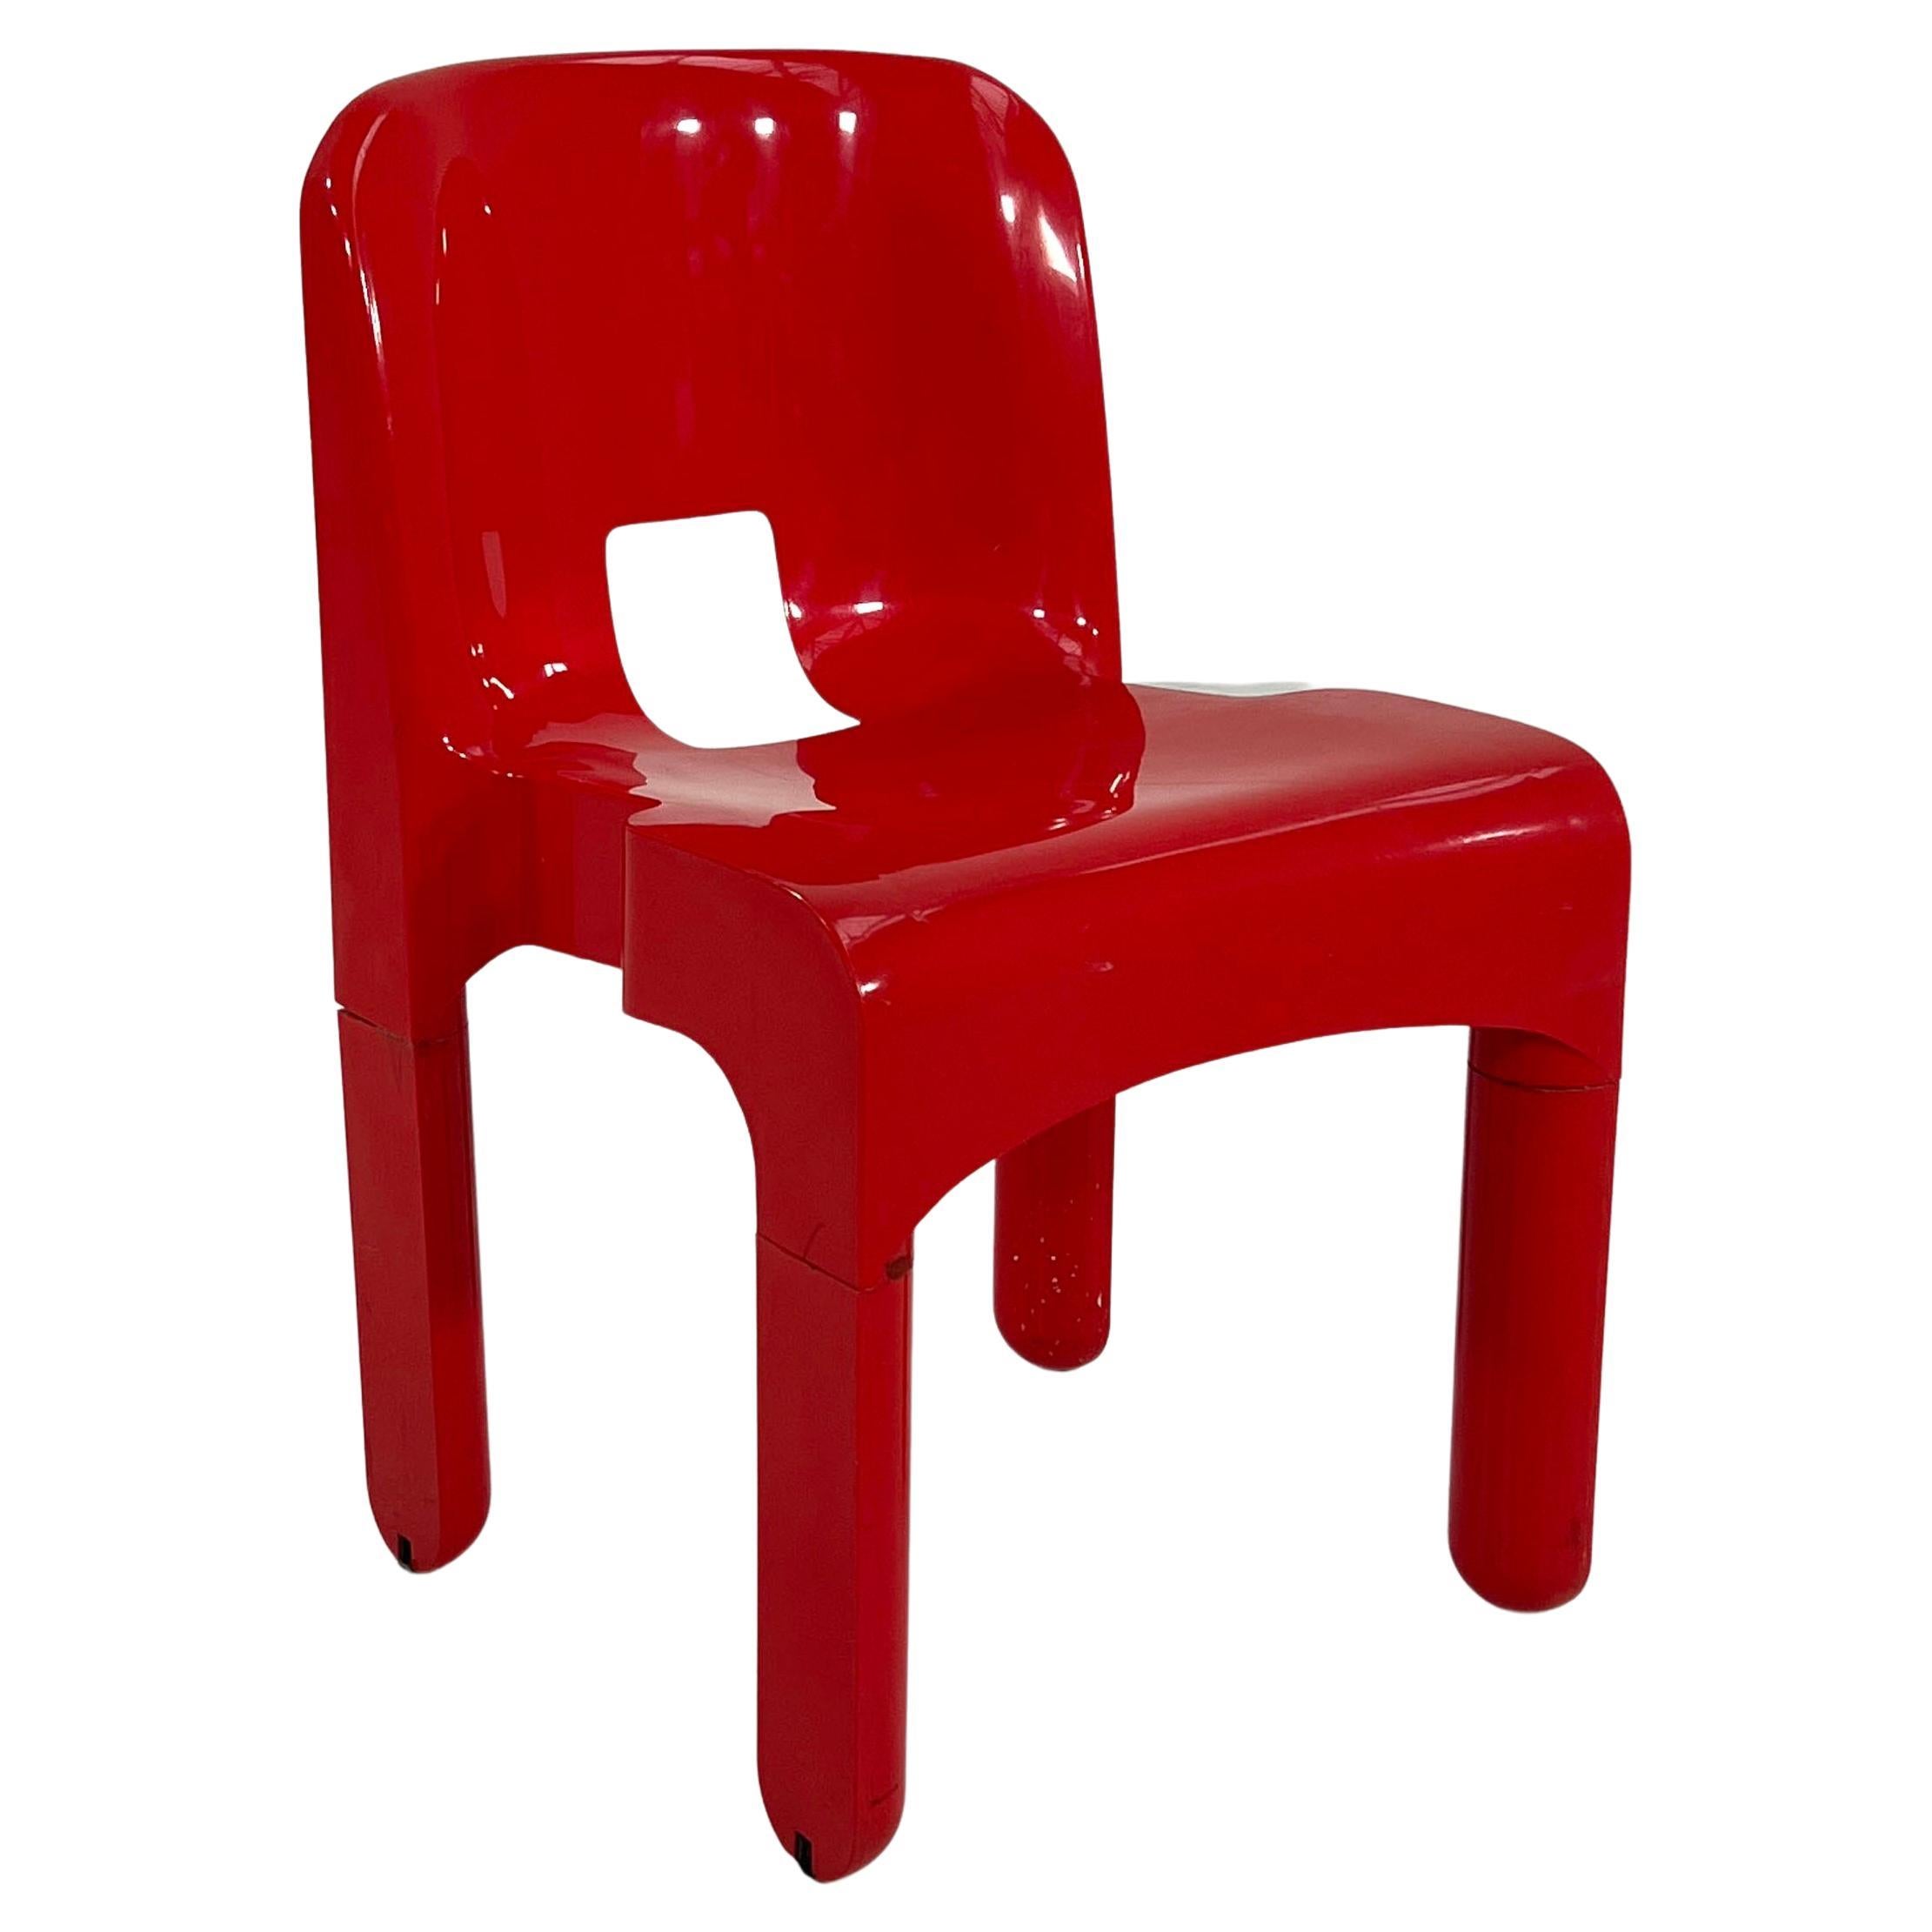 Red Model 4869 Universale Chair by Joe Colombo for Kartell, 1970s